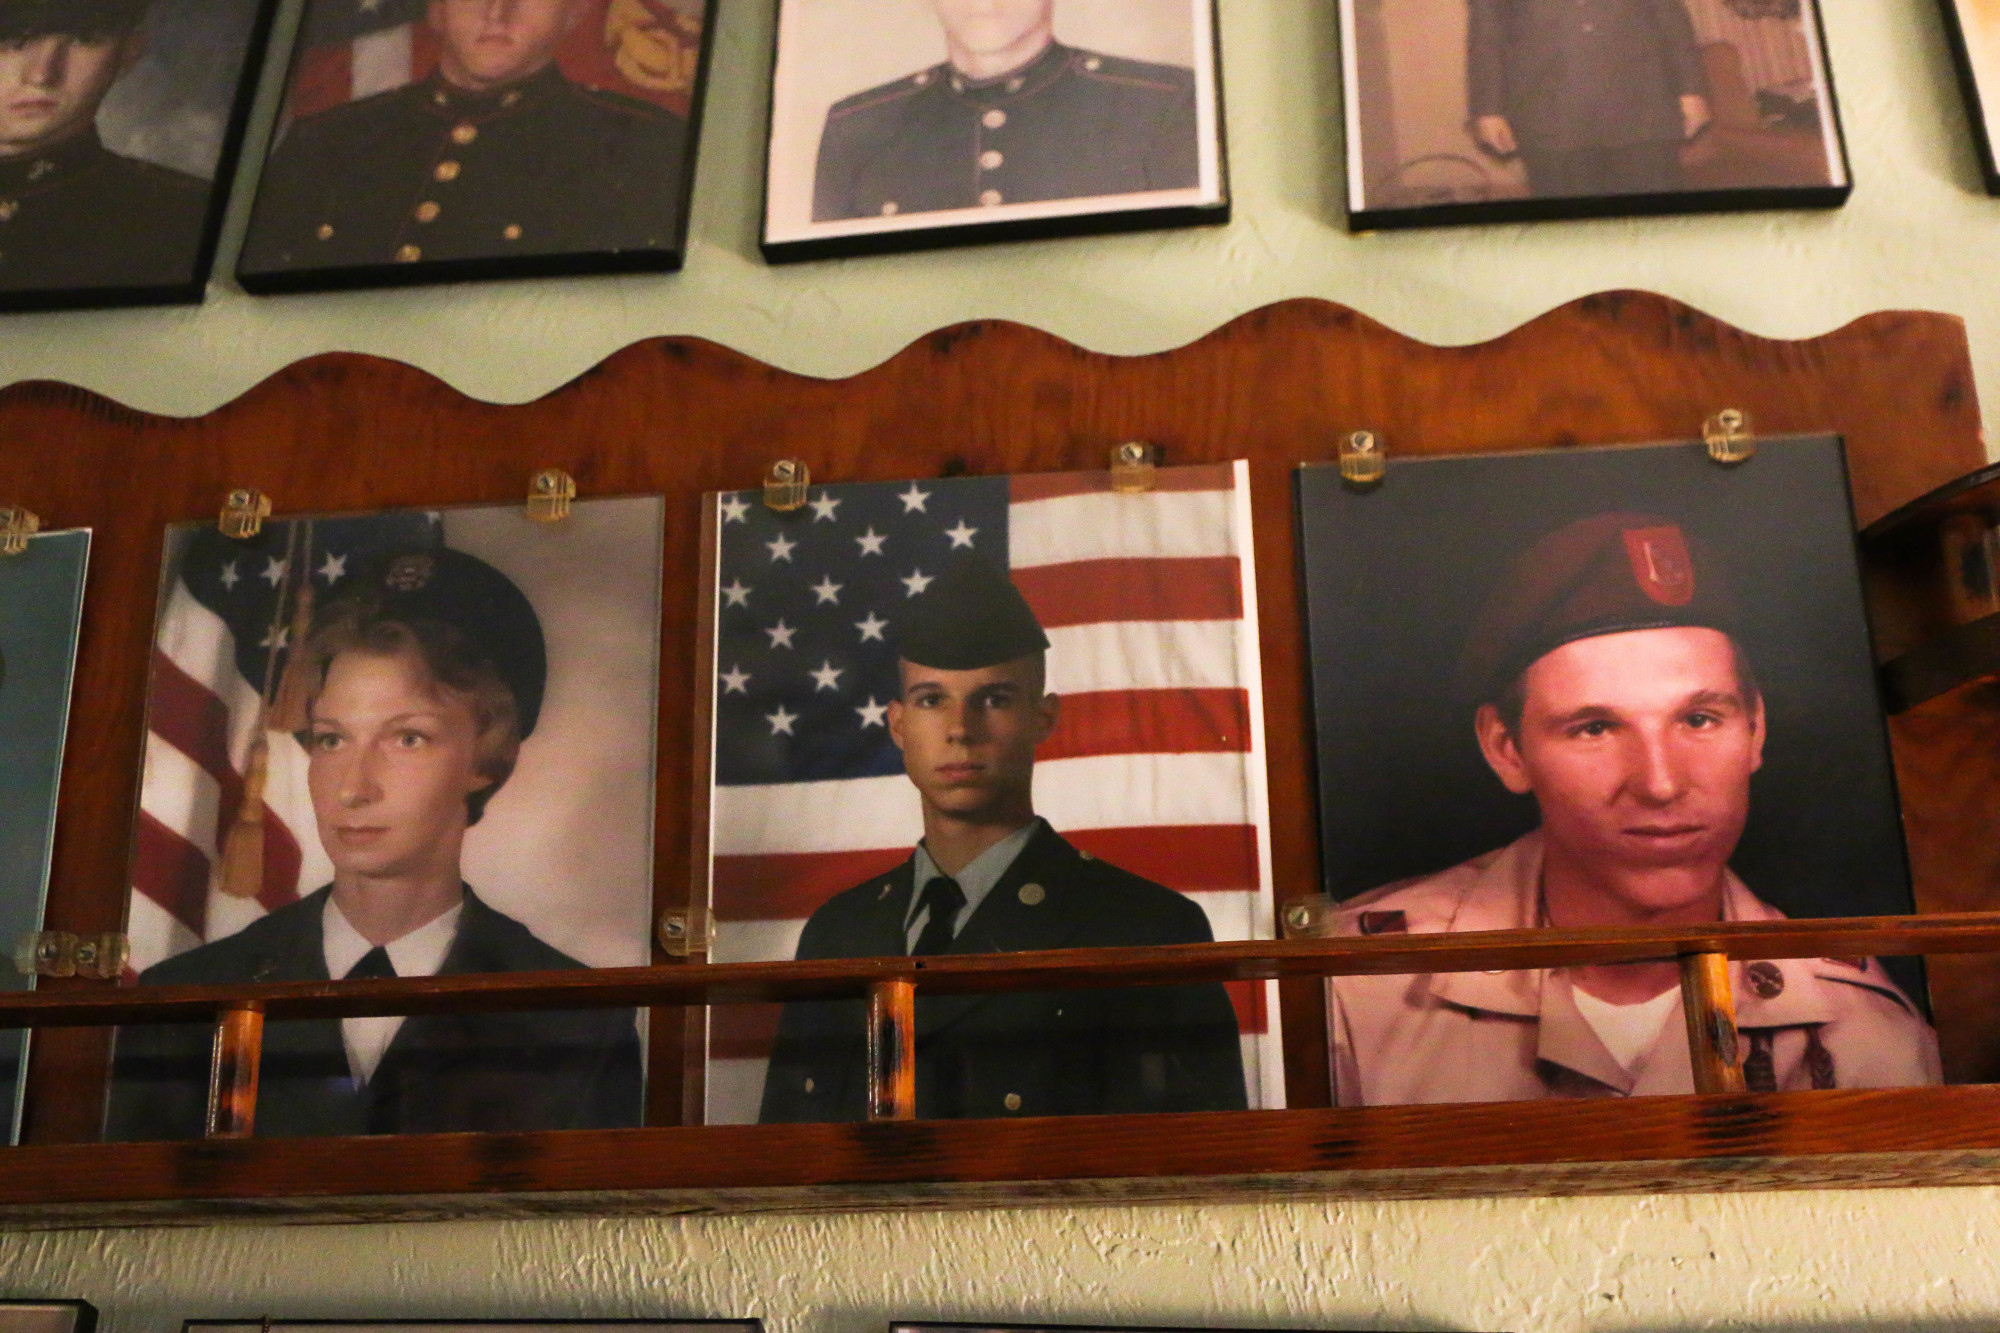 Photos of Joyce (left) and Mark Grubenhoff (right) and one of their sons, Kevin Grubenhoff (middle), are on display on the wall. Photo by Paige Wilson